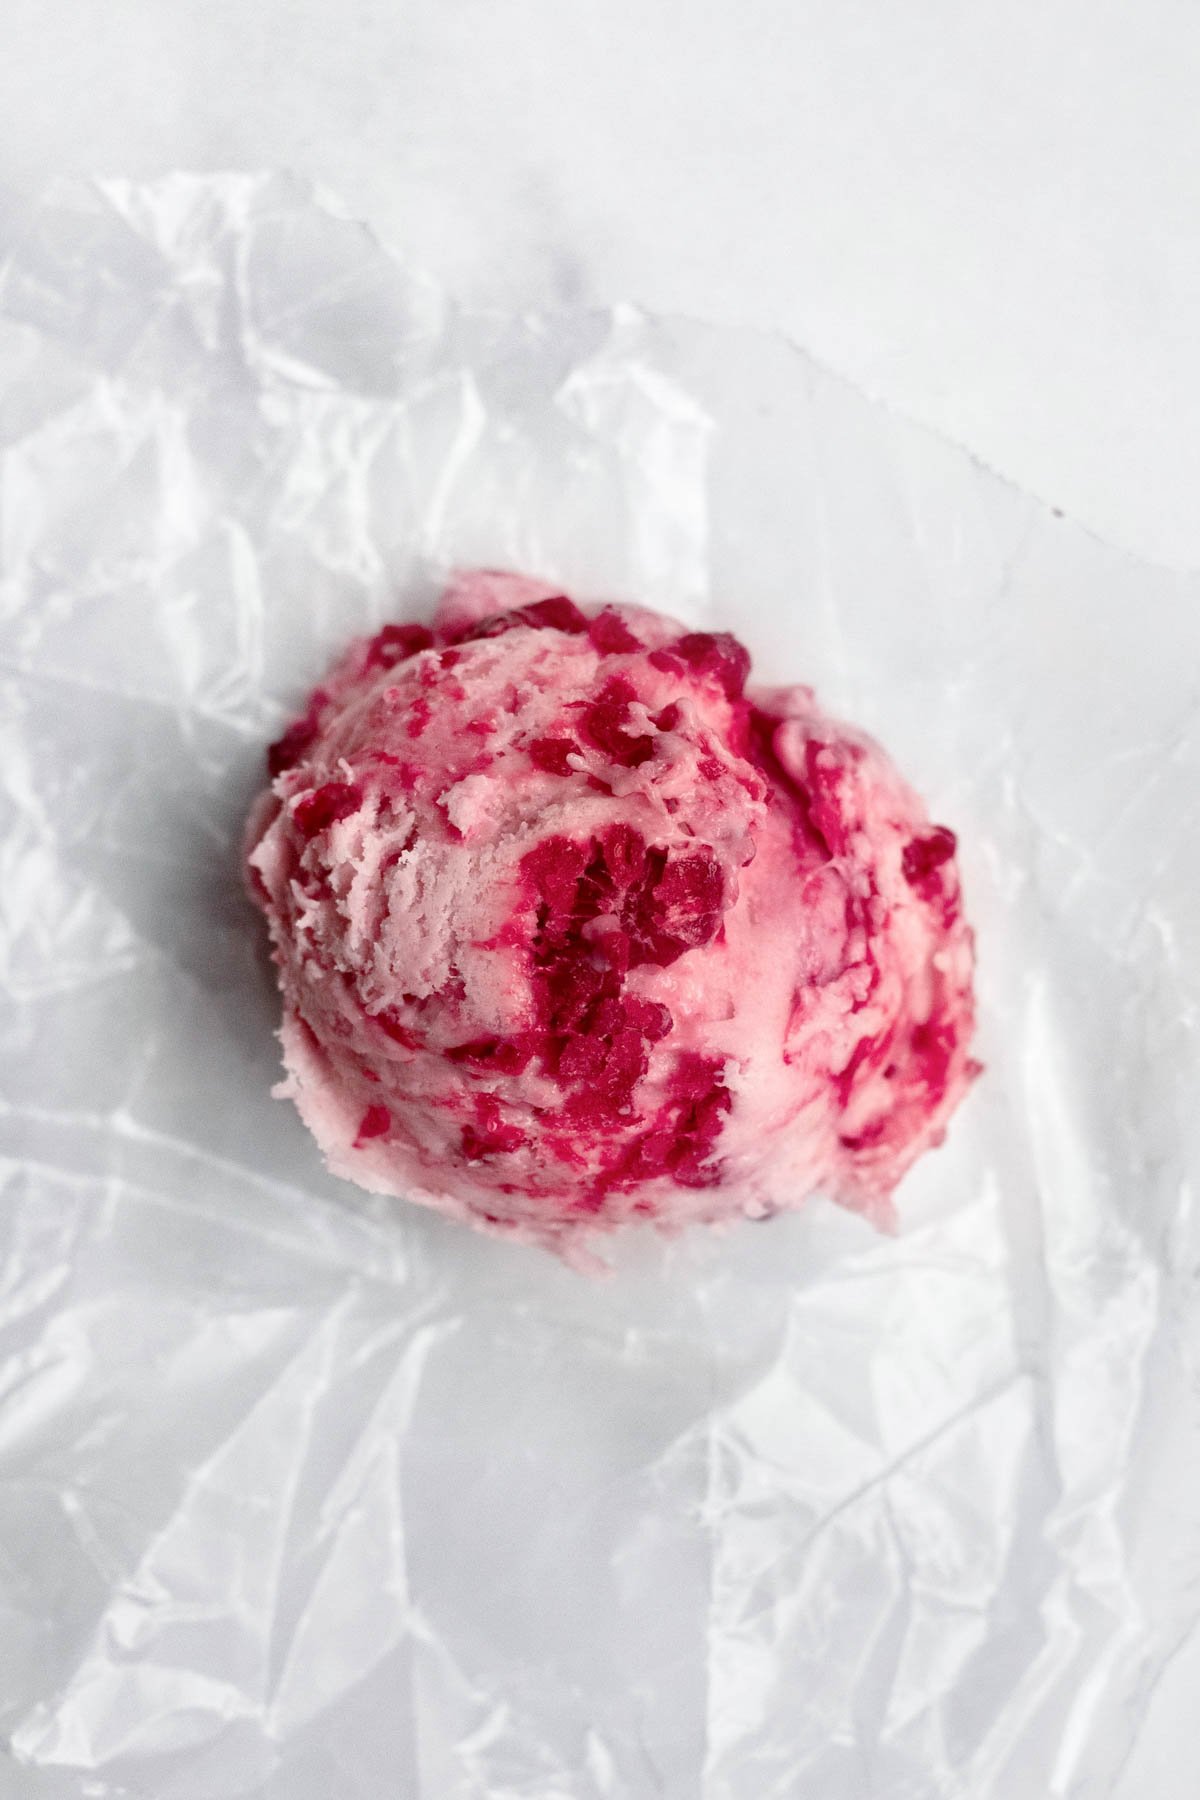 A scooped ball of raspberry infused cookie dough.